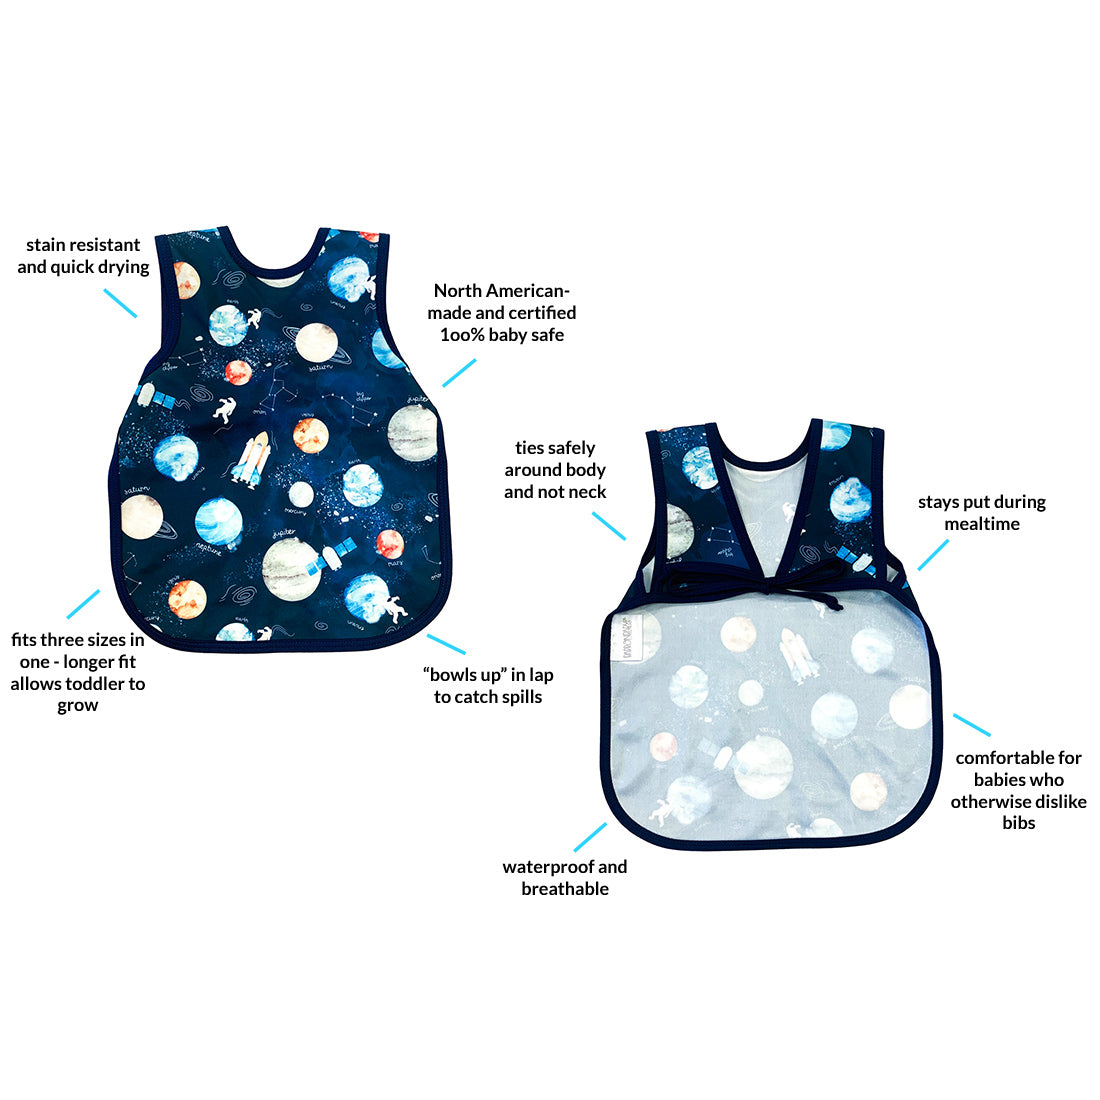 BapronBaby Toddler Bib (6m+) Outer Space